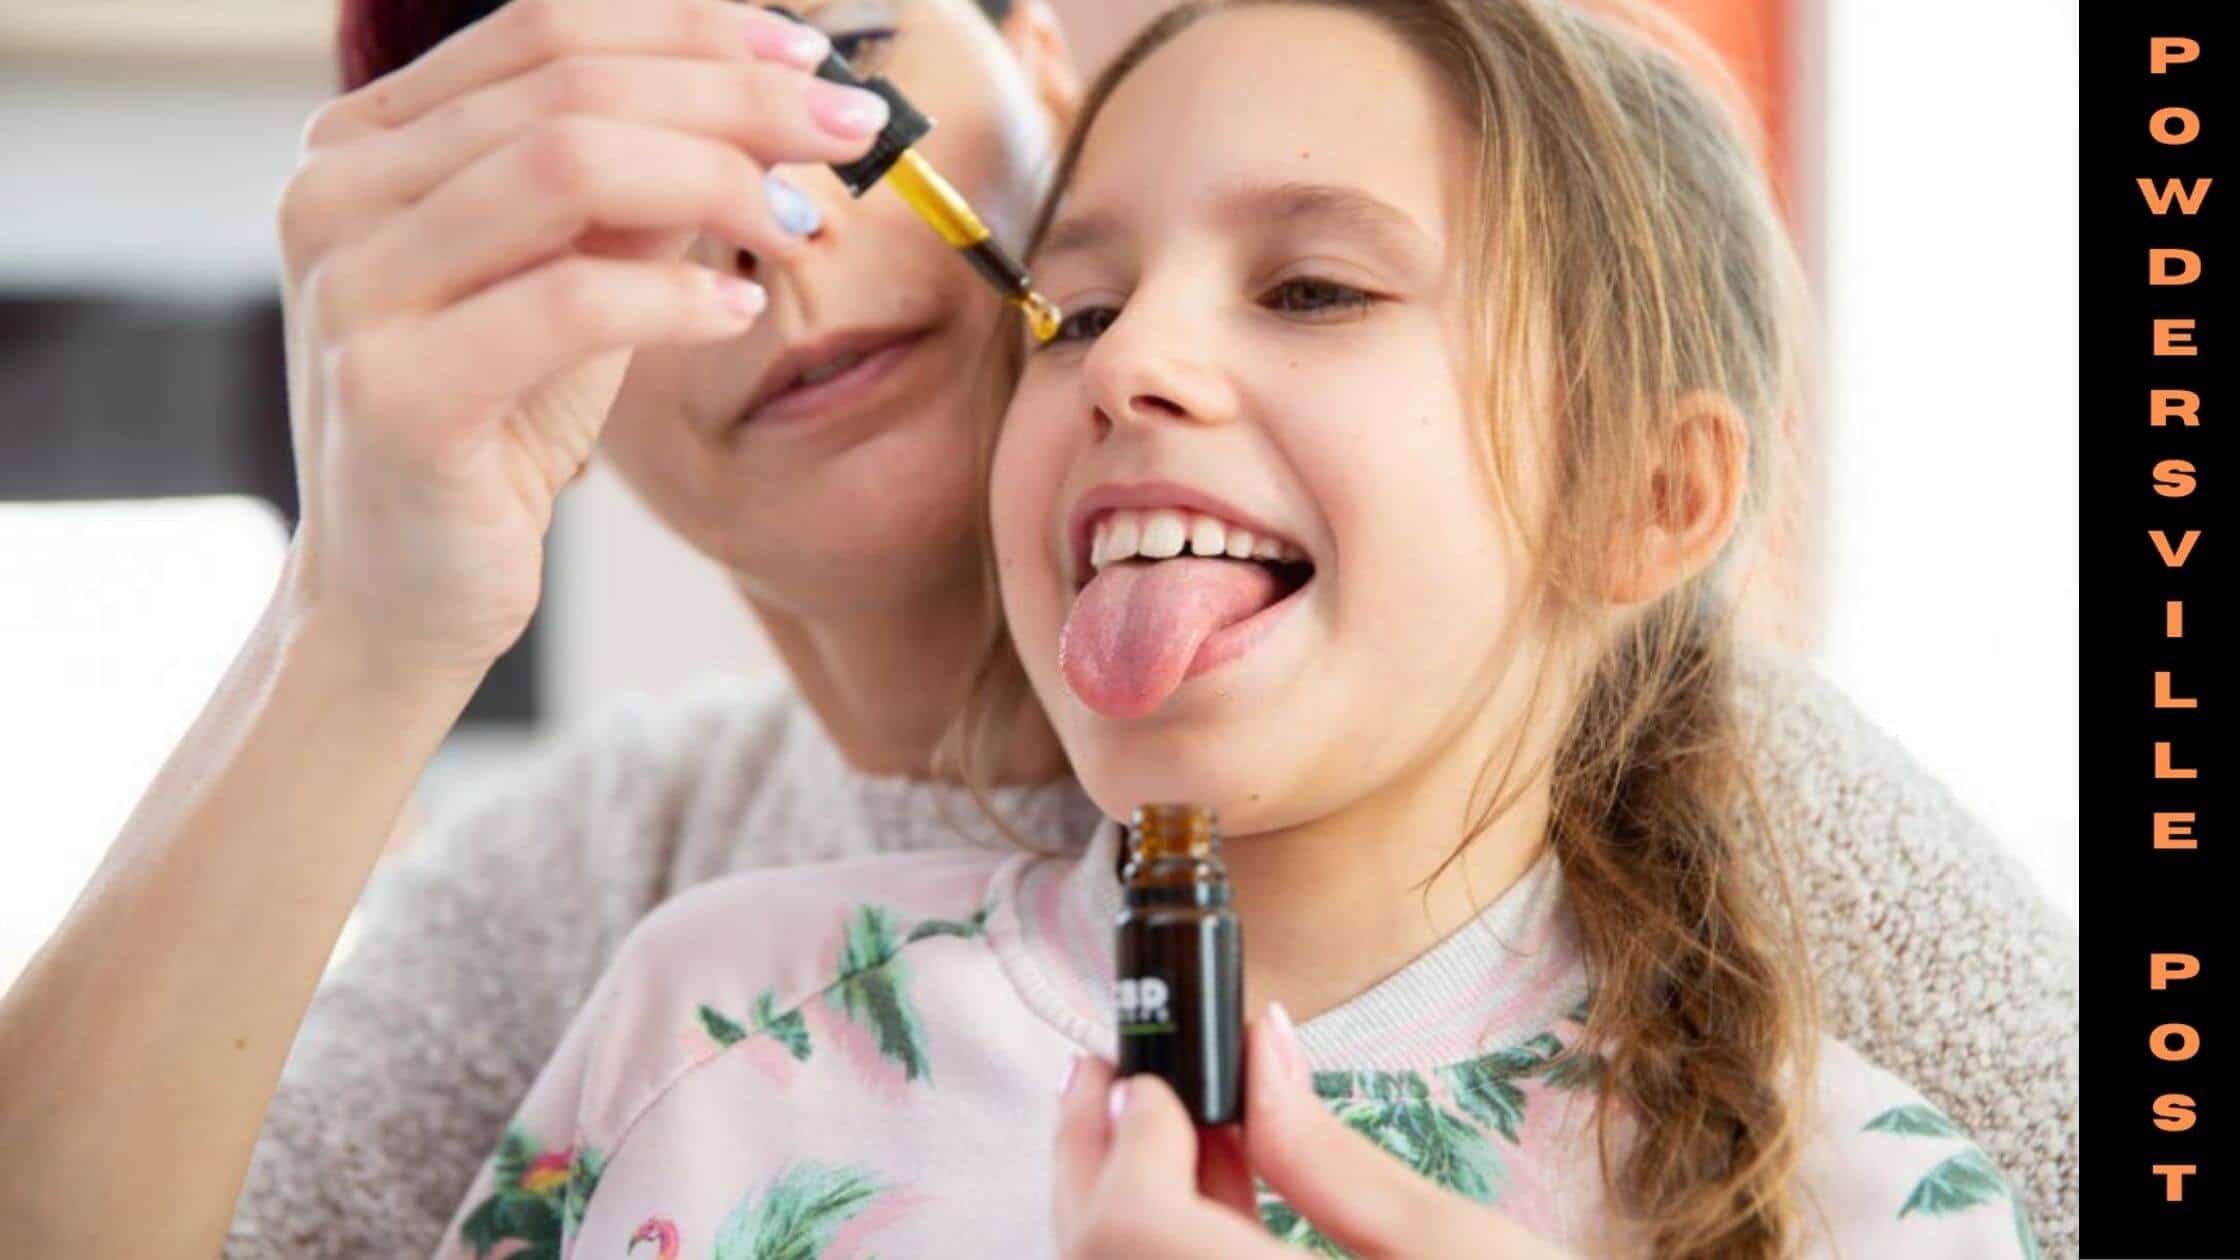 Should CBD Be Used By Parents To Treat Children